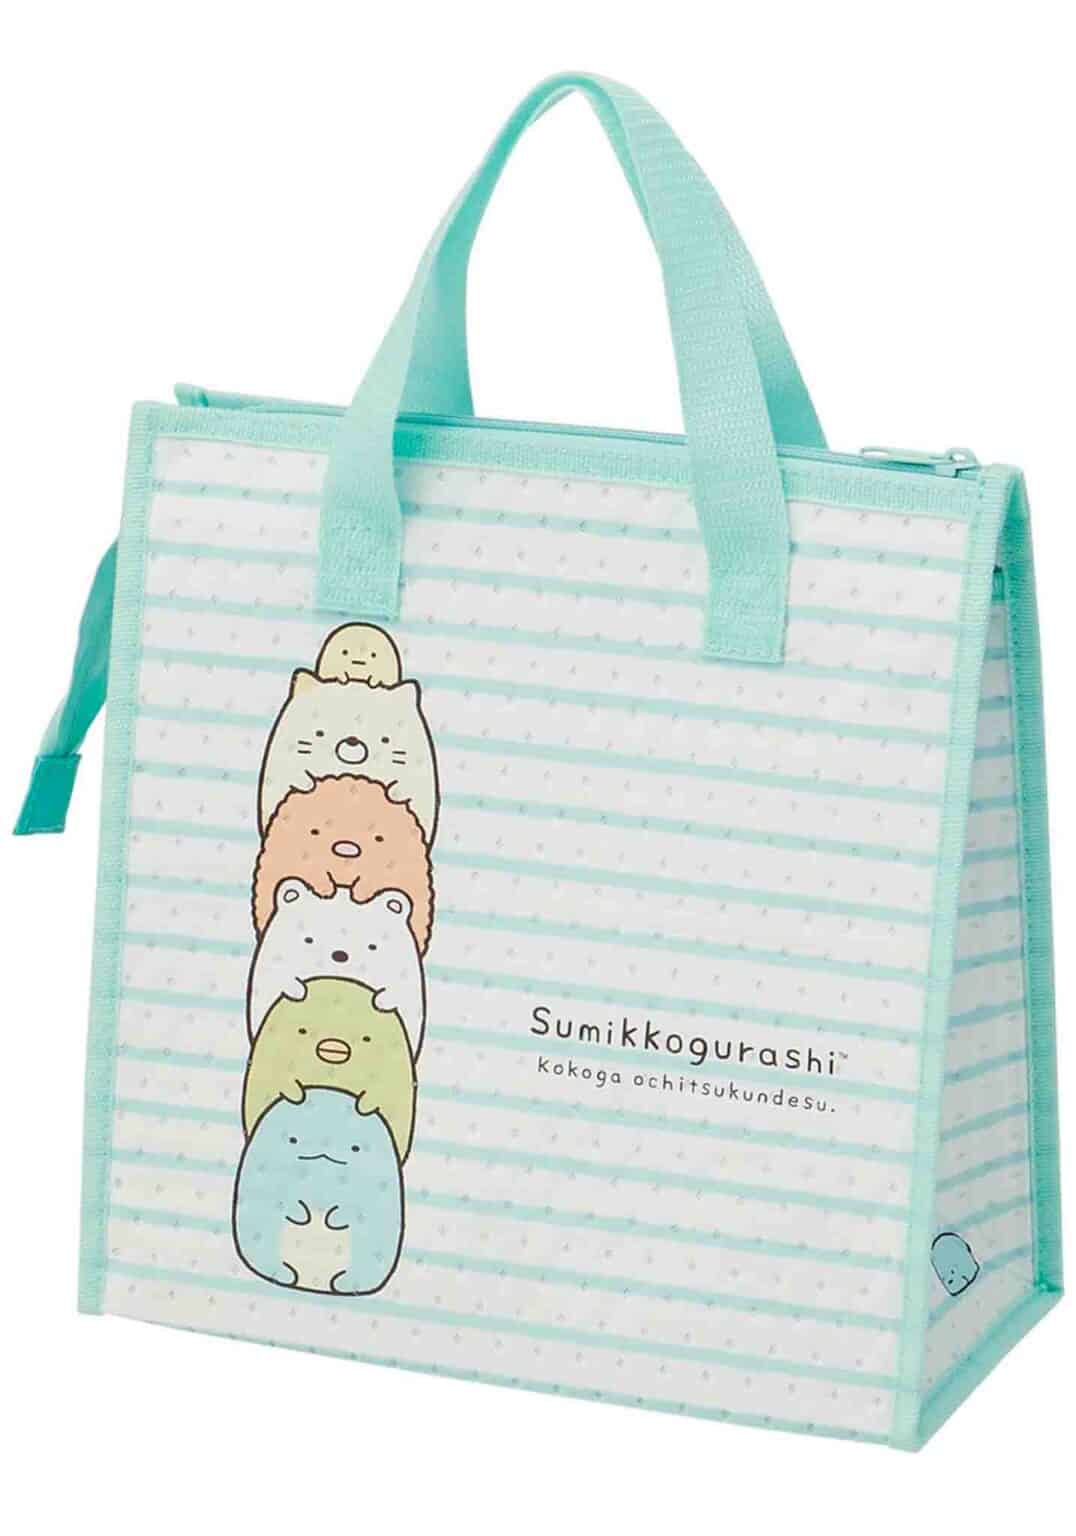 Clever Idiots Sumikko Gurashi Insulated Lunch Bags Blue Kawaii Gifts 4973307482526